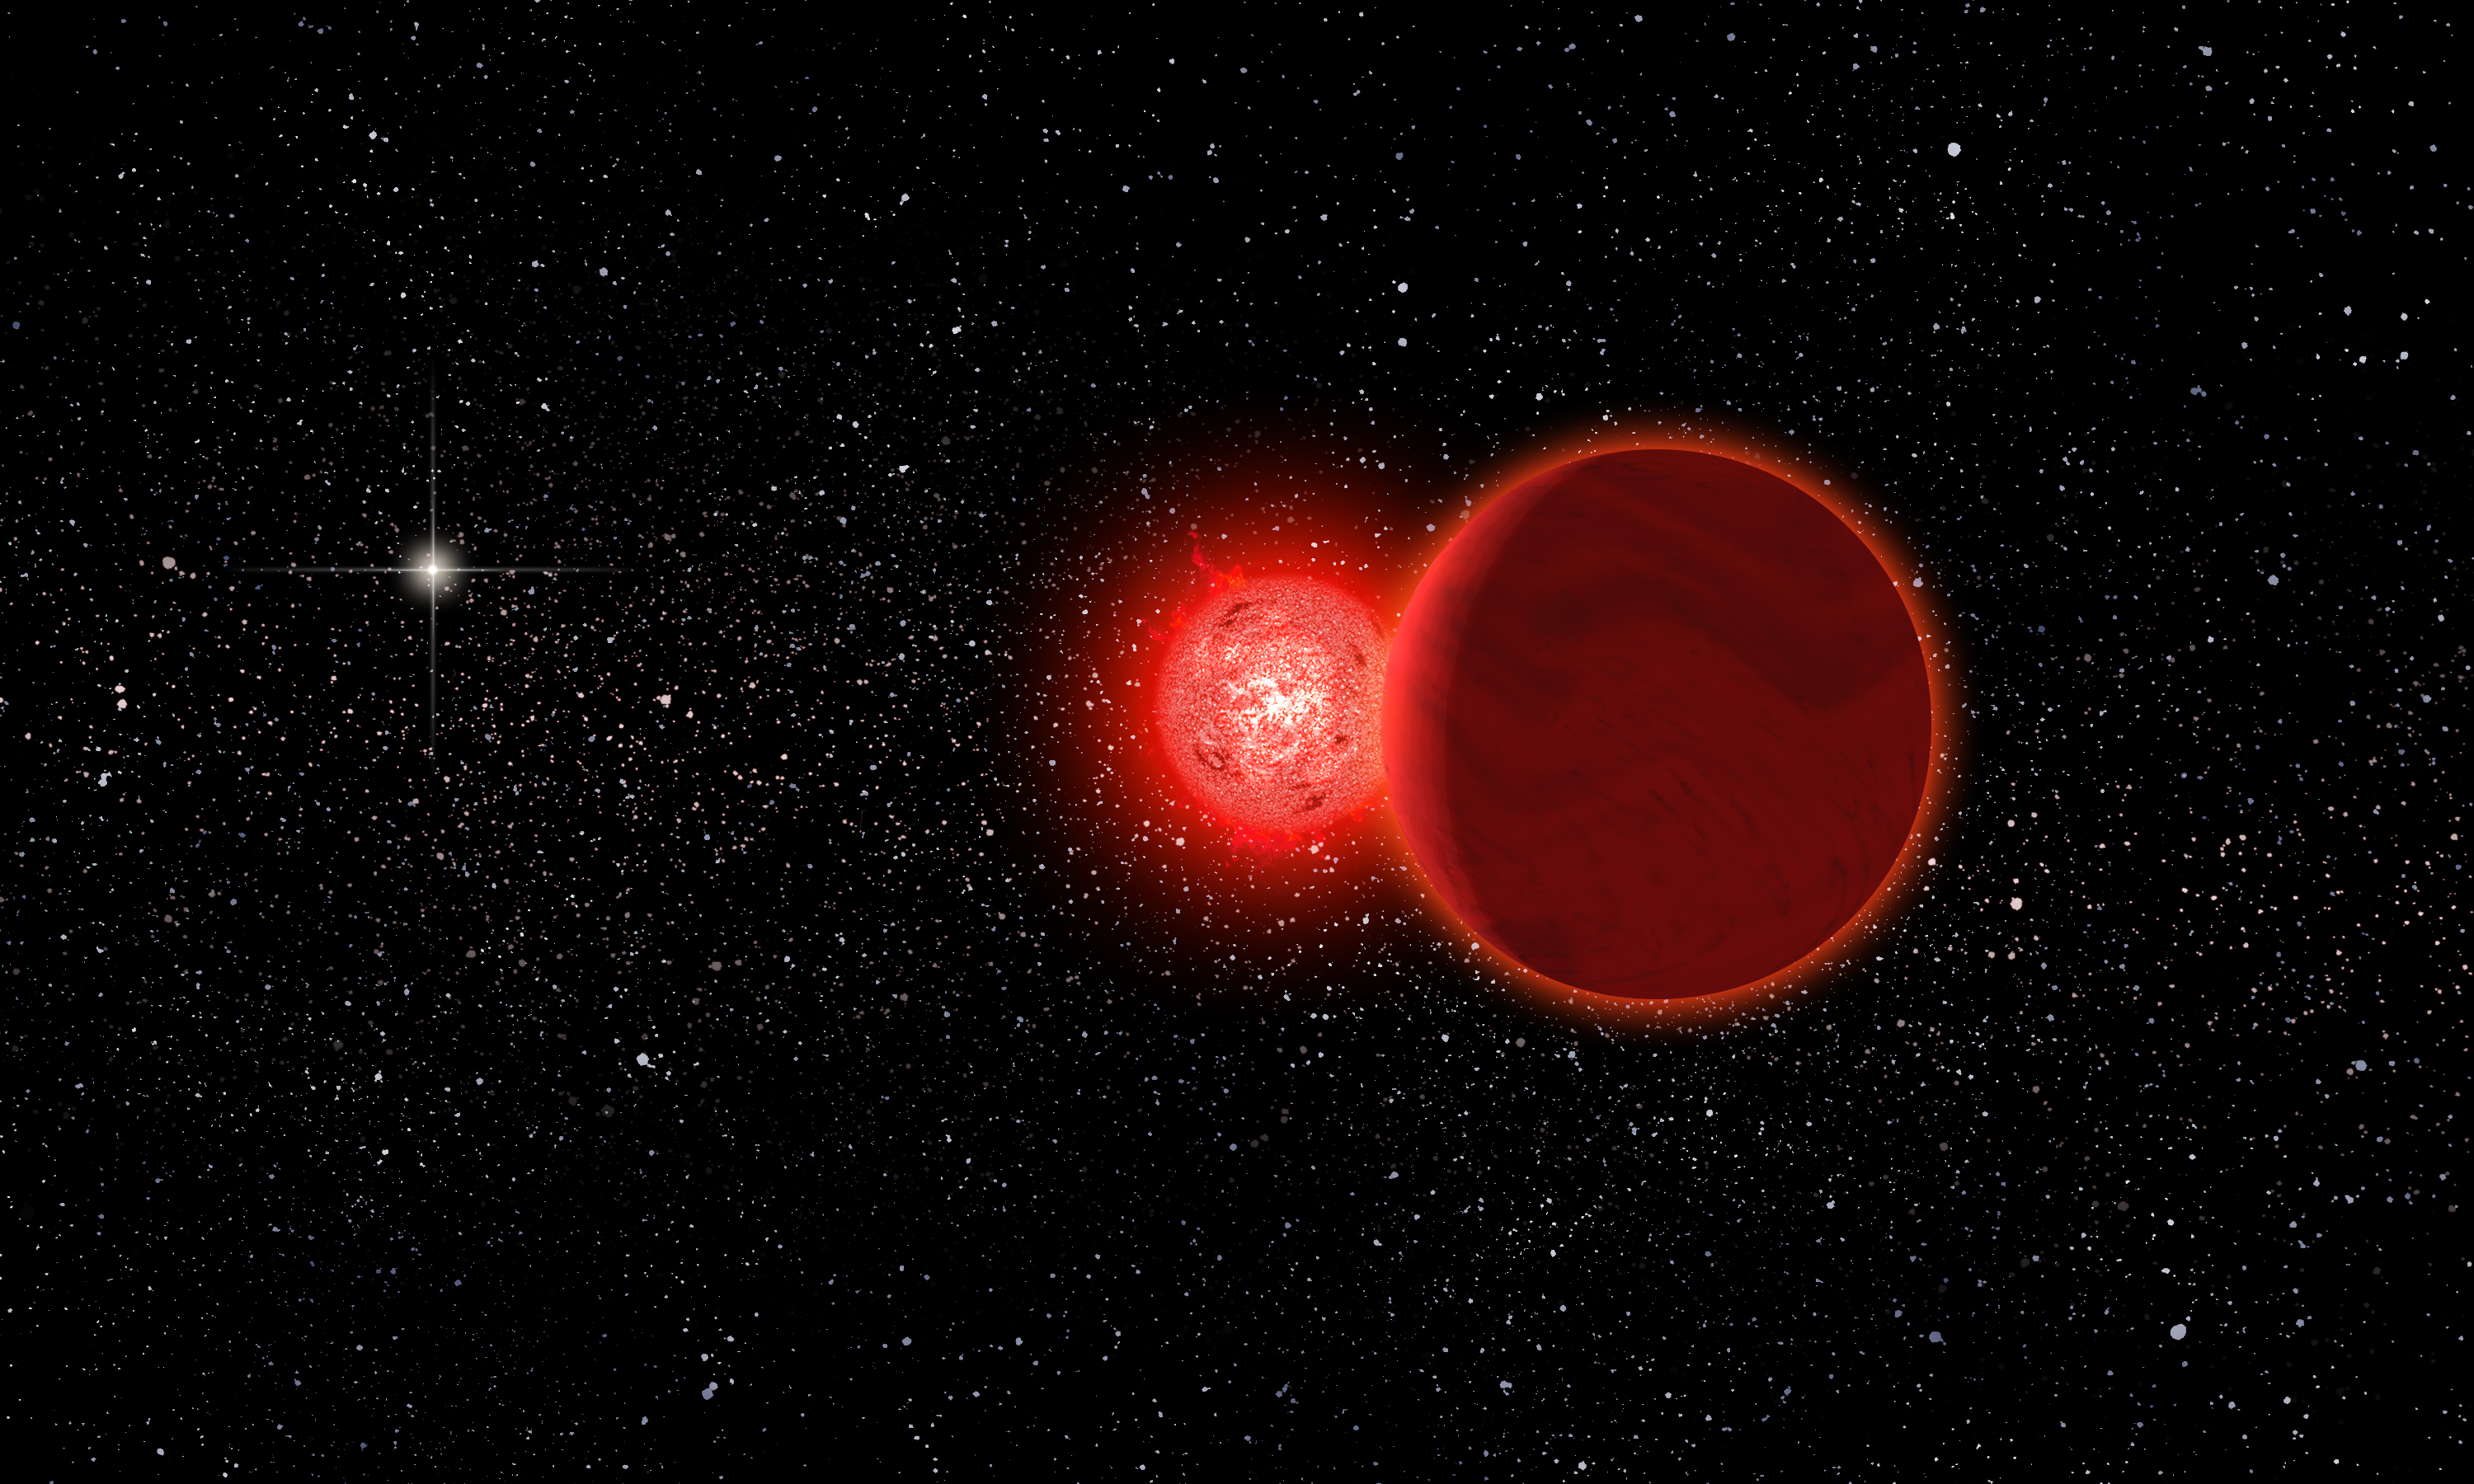 Artist's conception of Scholz's star and its brown dwarf companion (foreground) during its flyby of the solar system 70,000 years ago. The Sun (left, background) would have appeared as a brilliant star. The pair is now about 20 light years away. Credit: Michael Osadciw/University of Rochester.